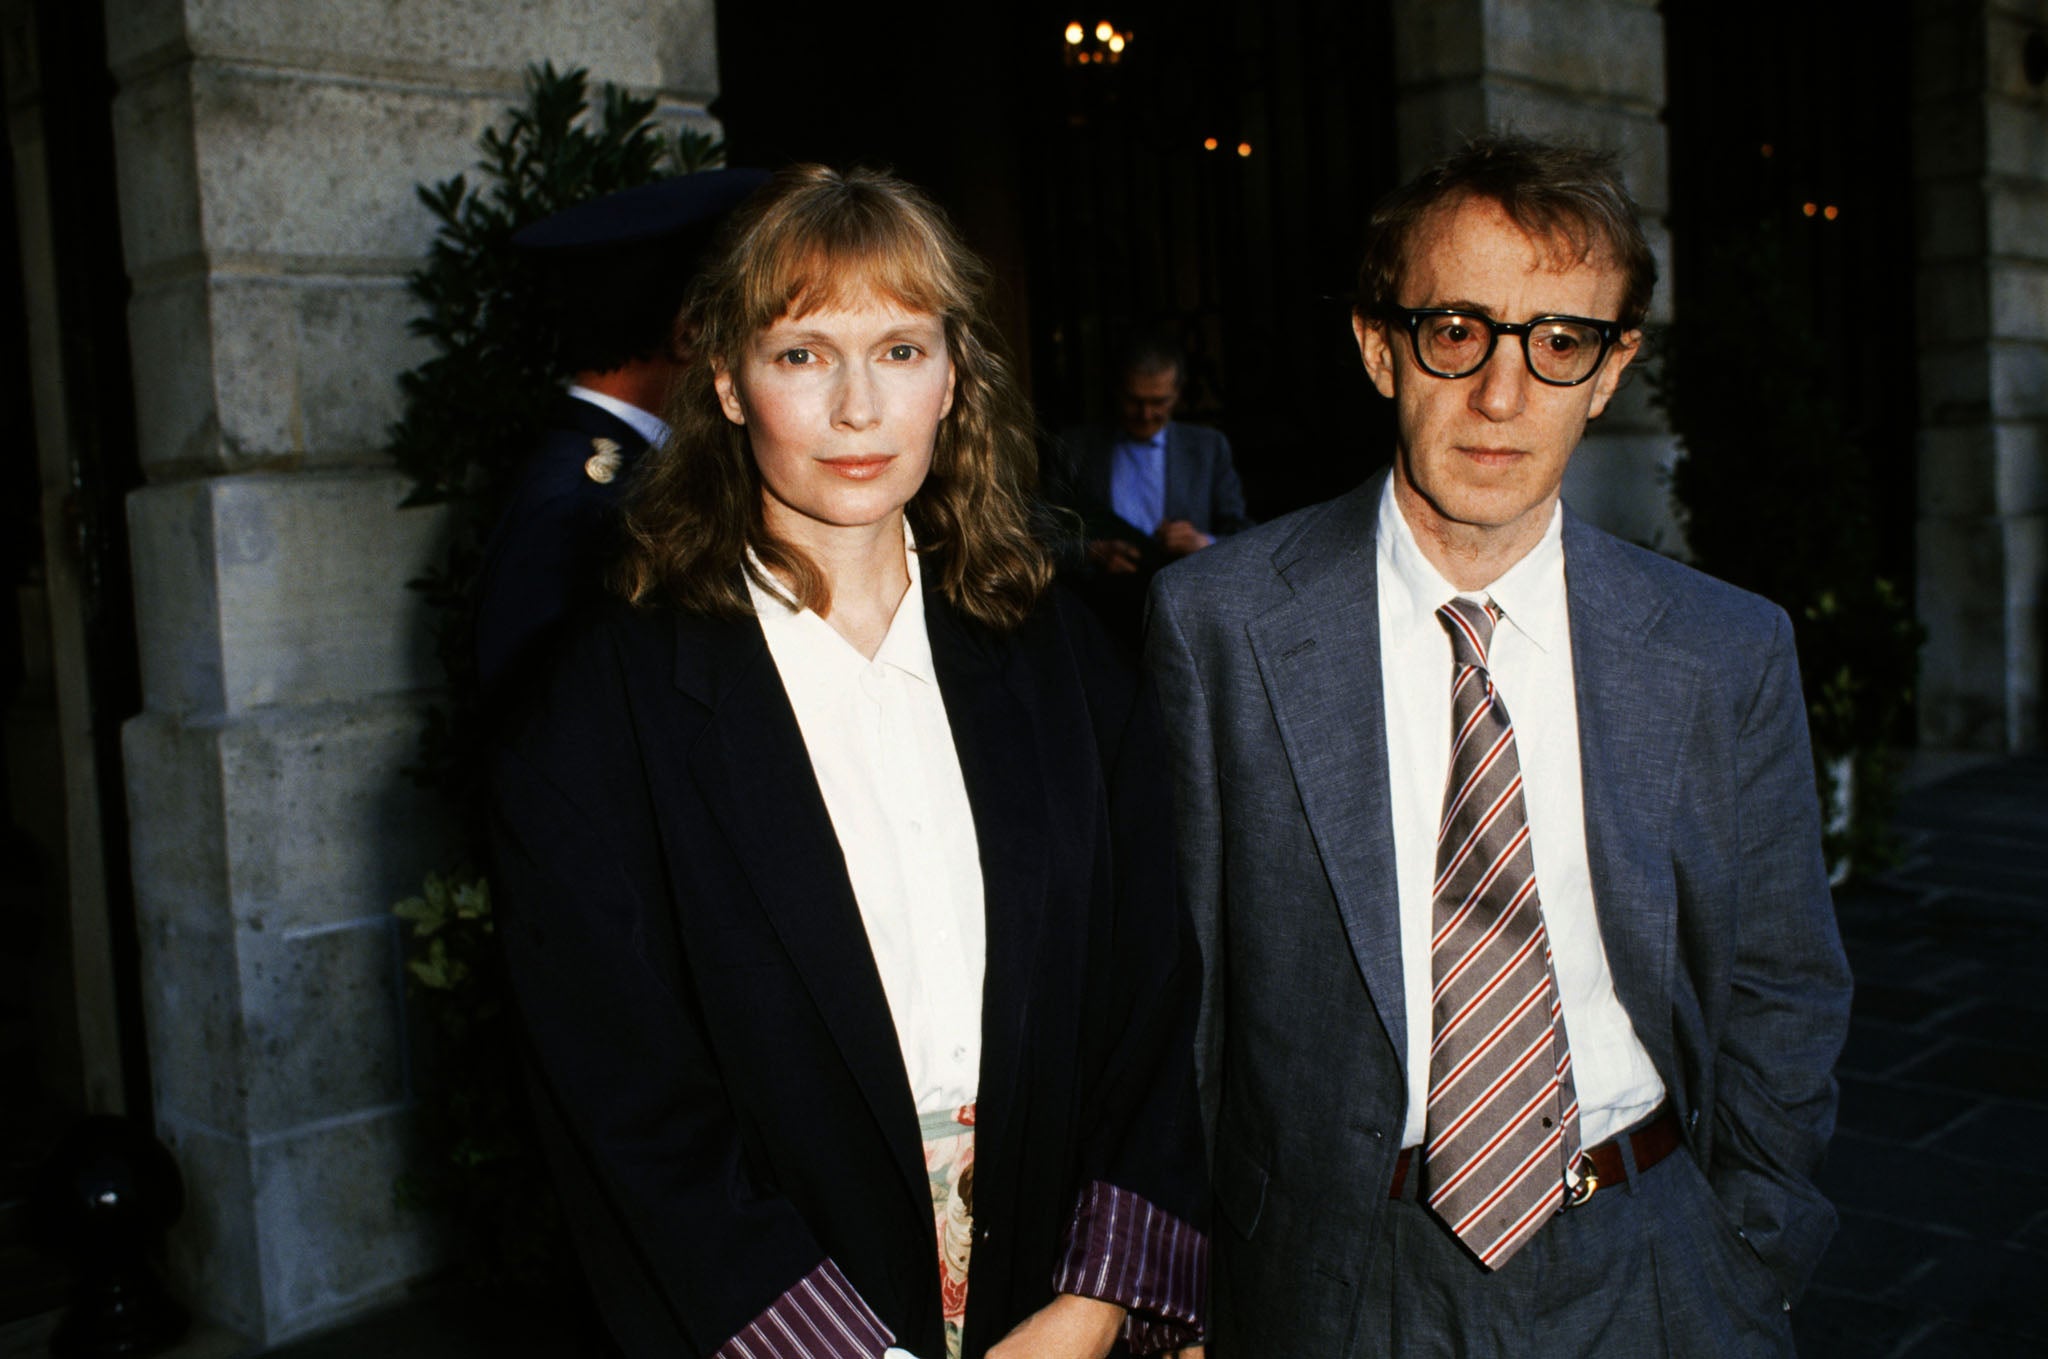 Mia Farrow and Woody Allen together in 1989